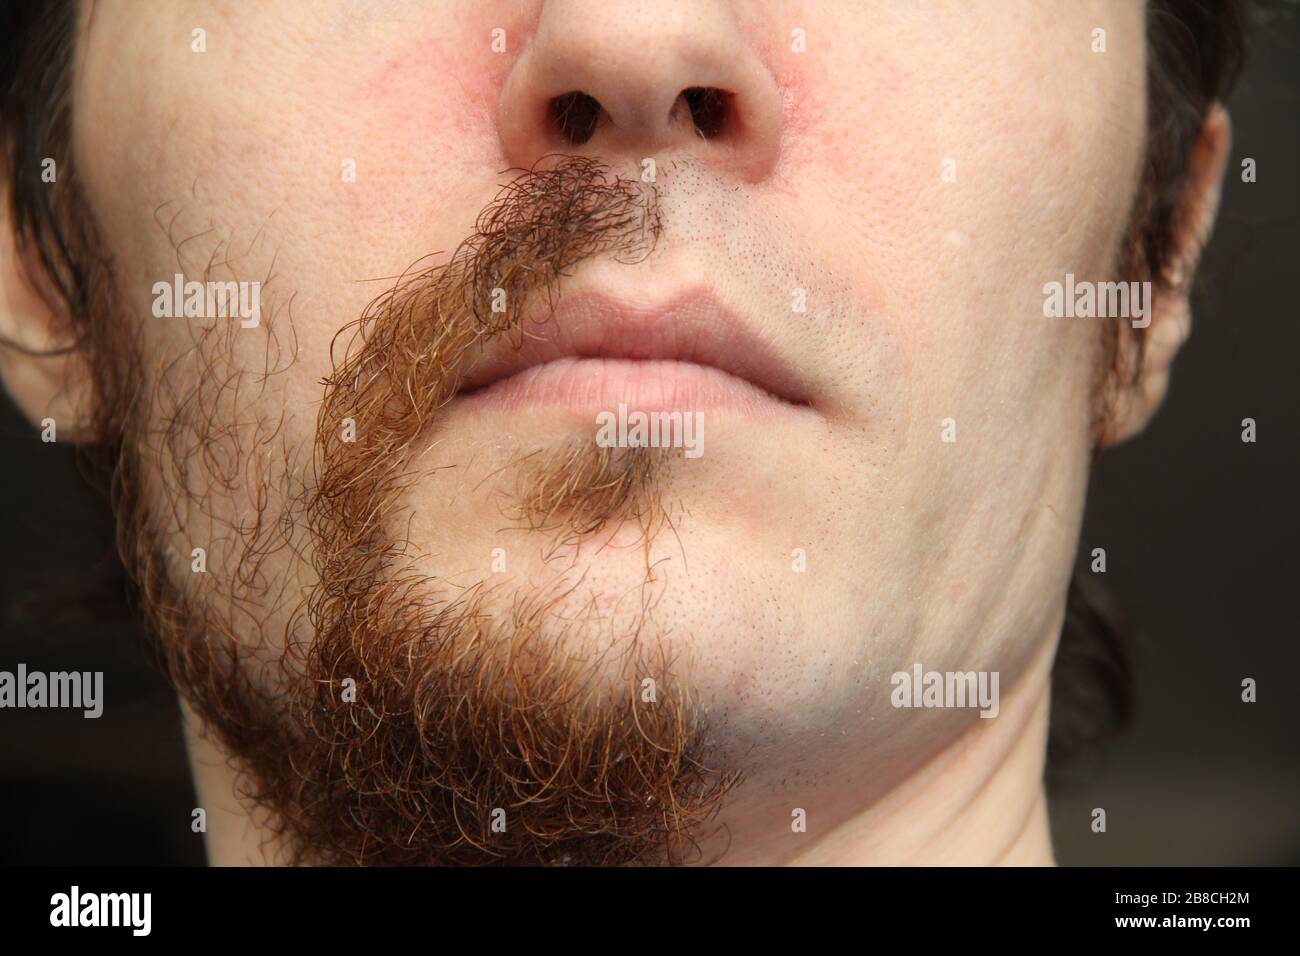 The lower part of the face of a white man. Half of the face is shaved, the other half with a beard and mustache Stock Photo